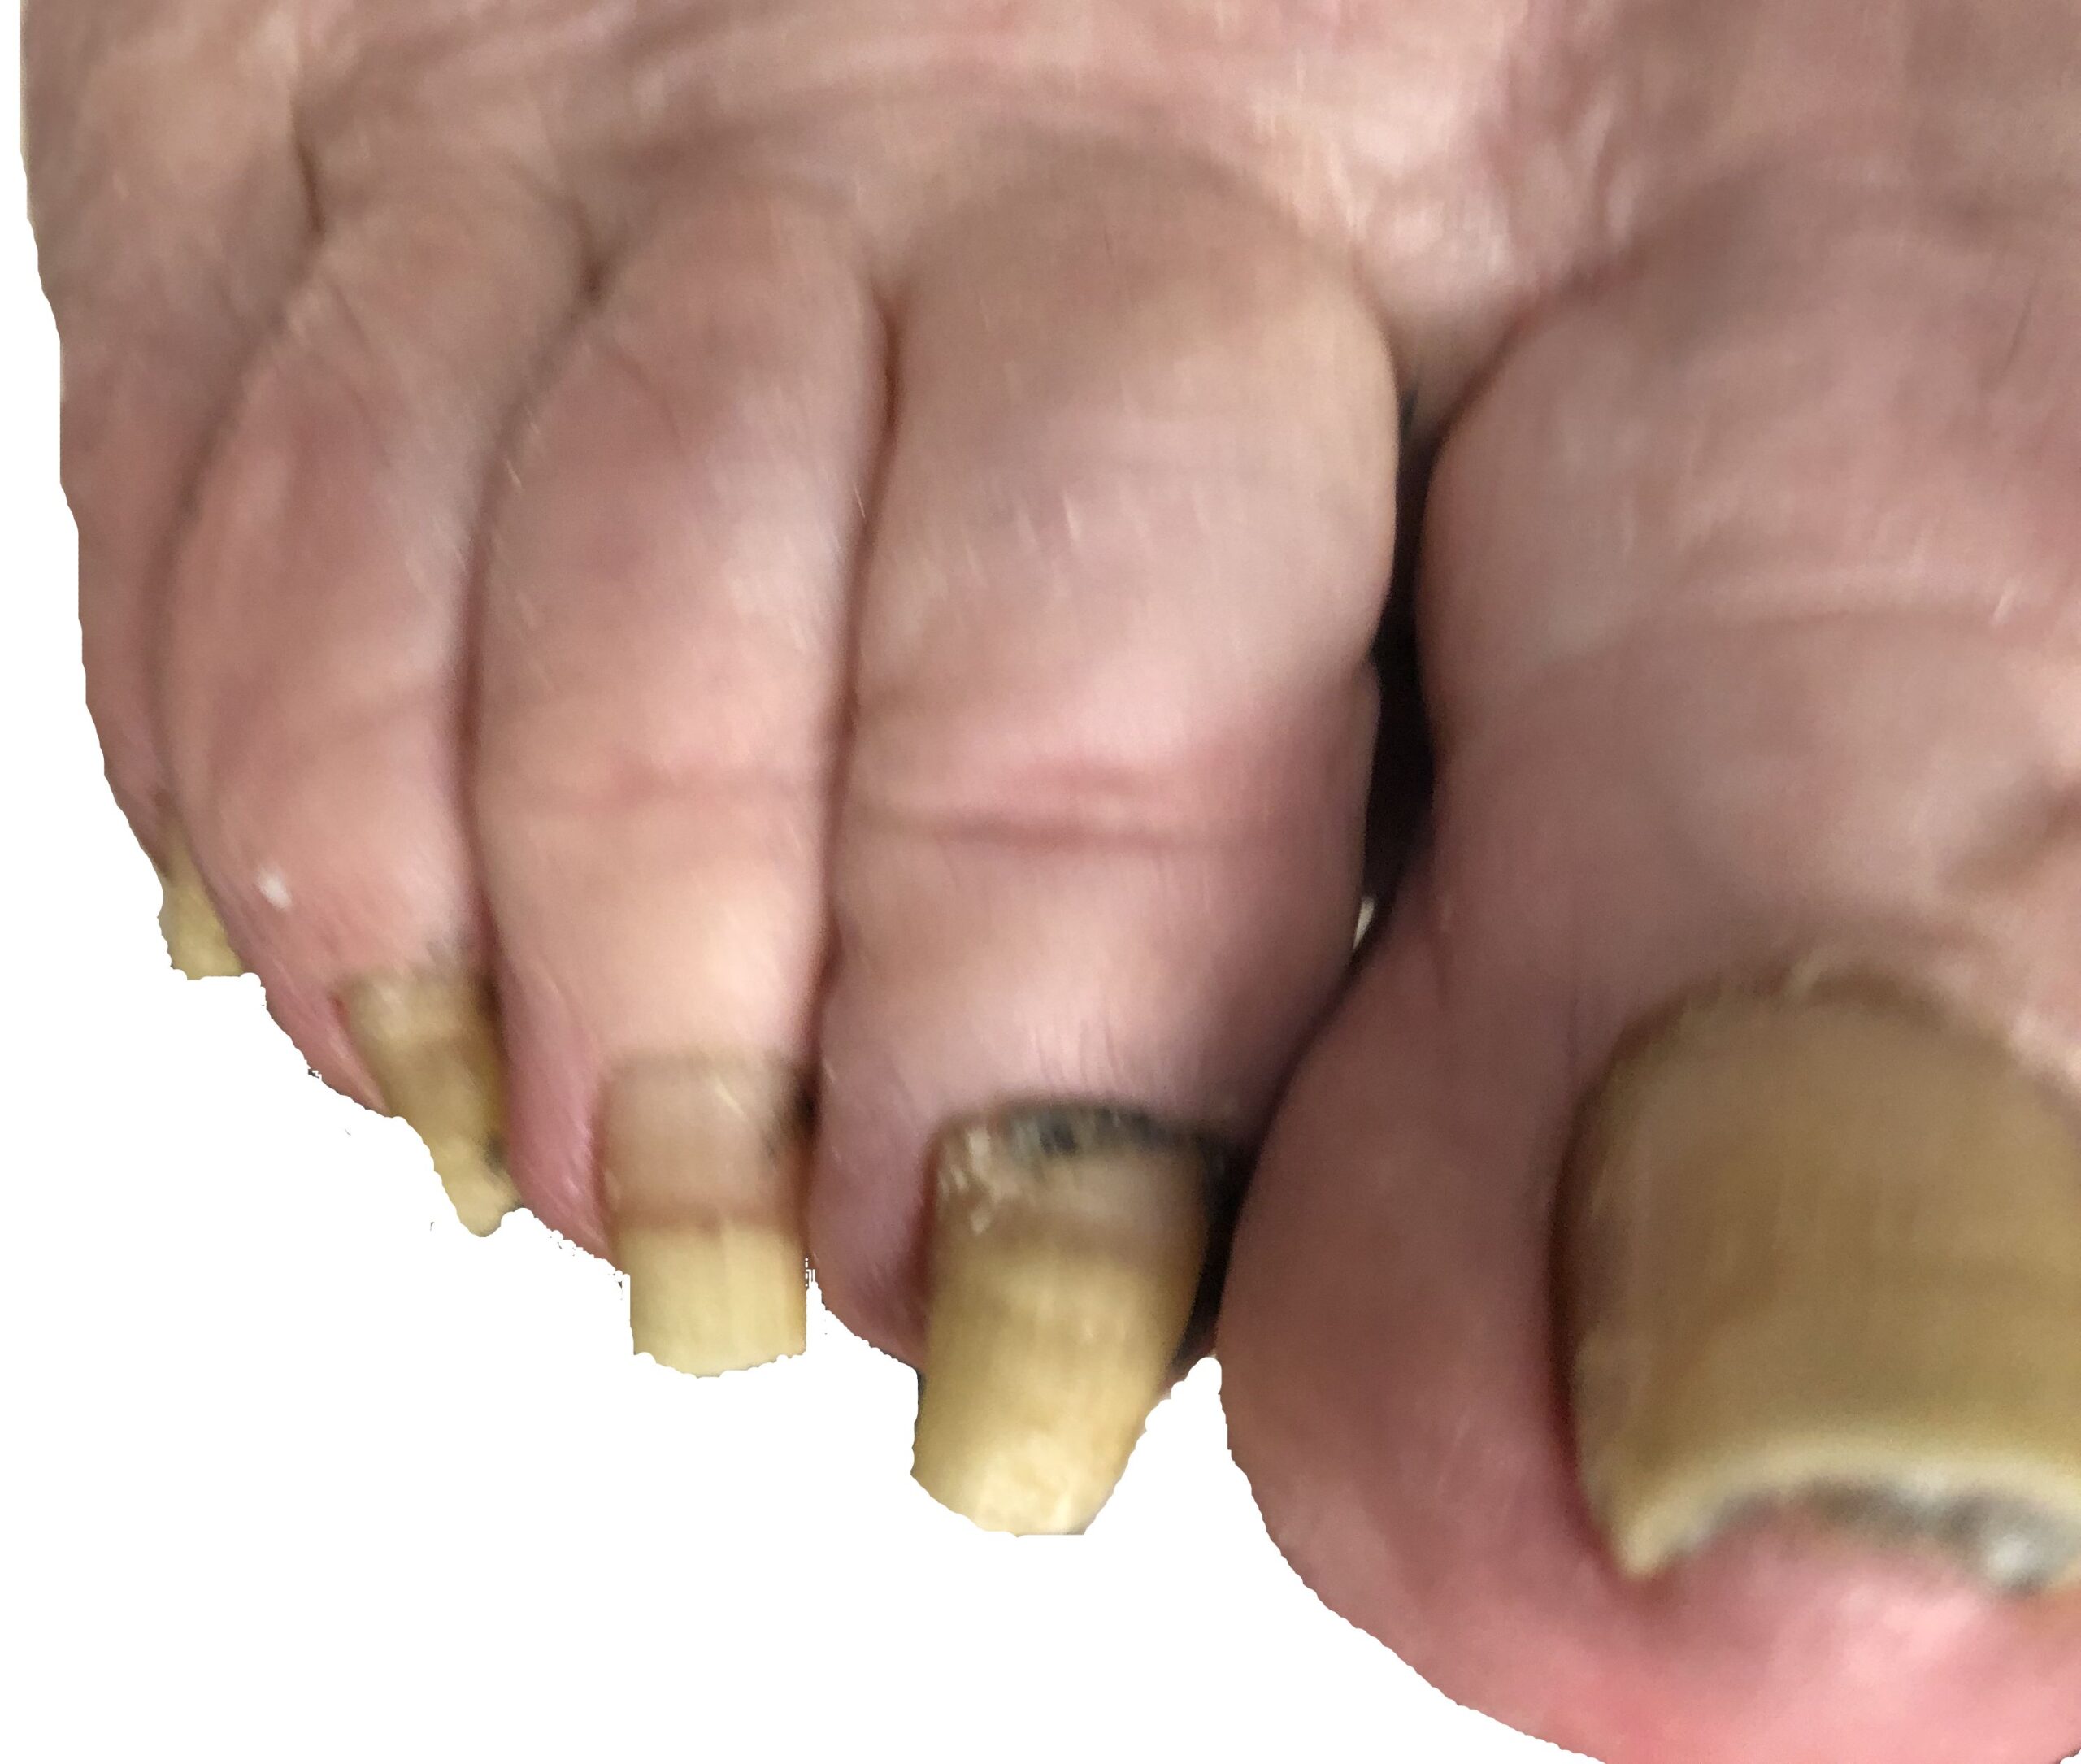 Thick, unmanageable toenails